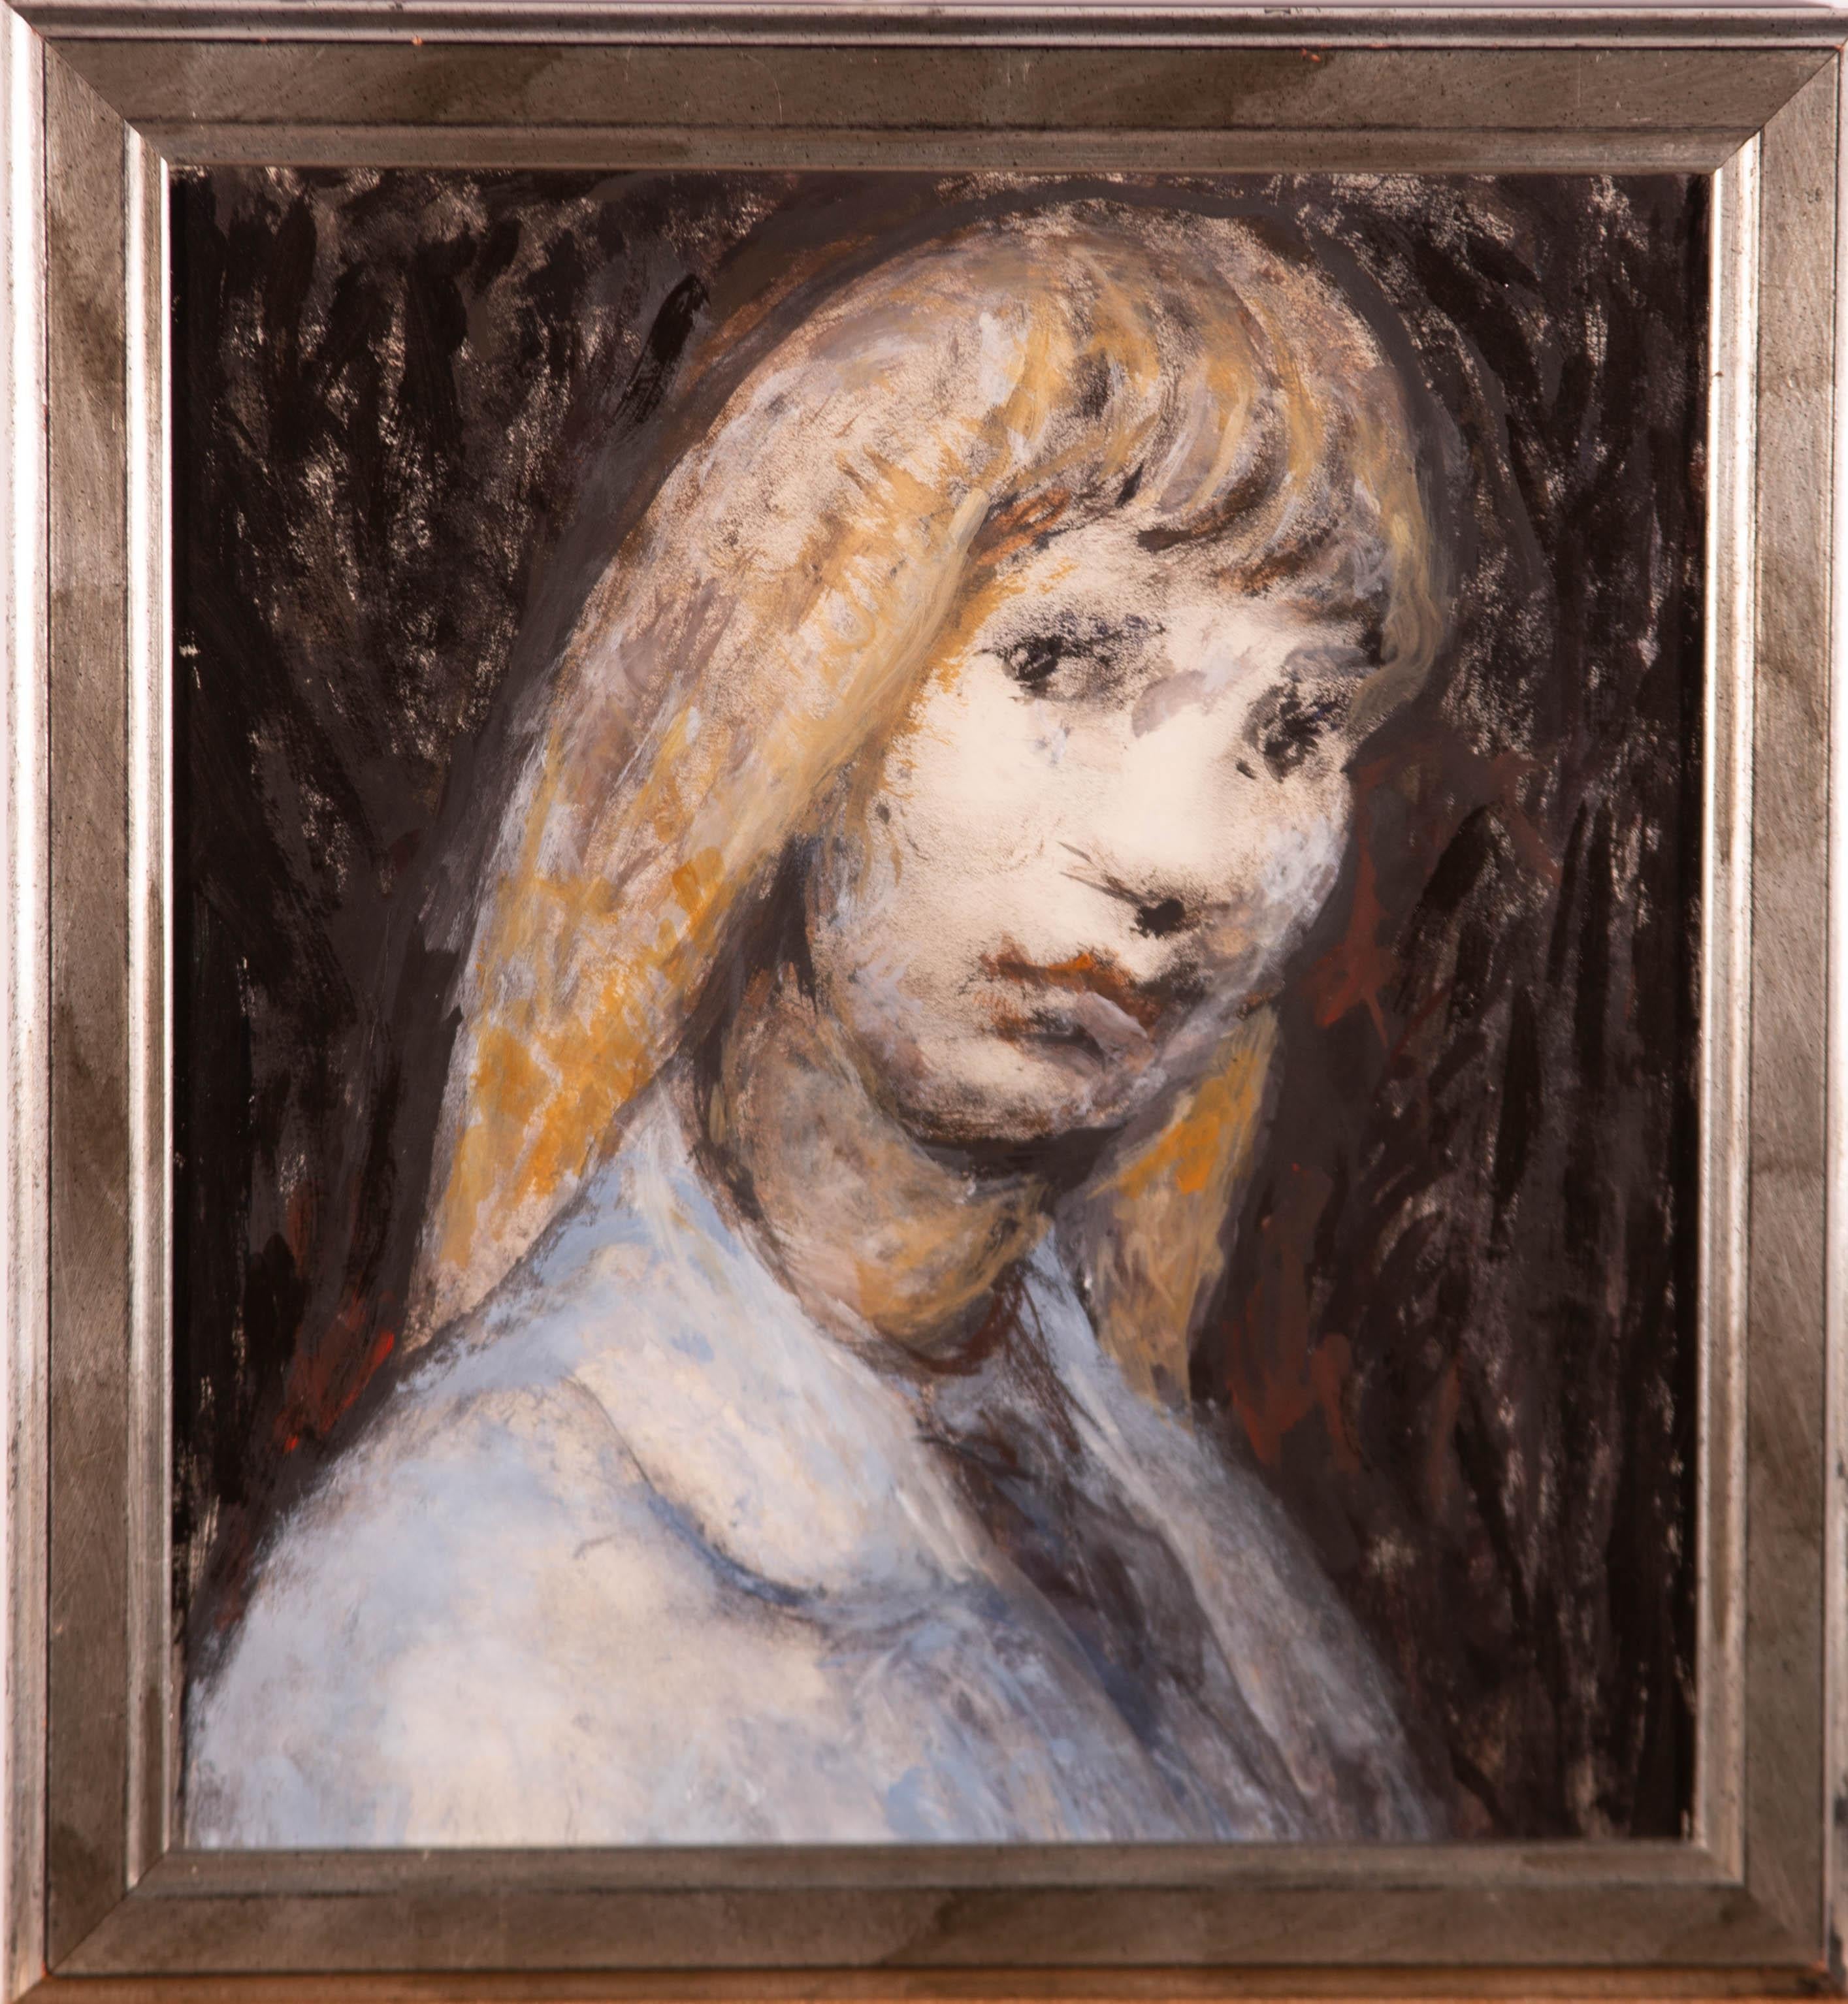 Unknown Portrait Painting - Framed 20th Century Acrylic - Blonde Haired Woman